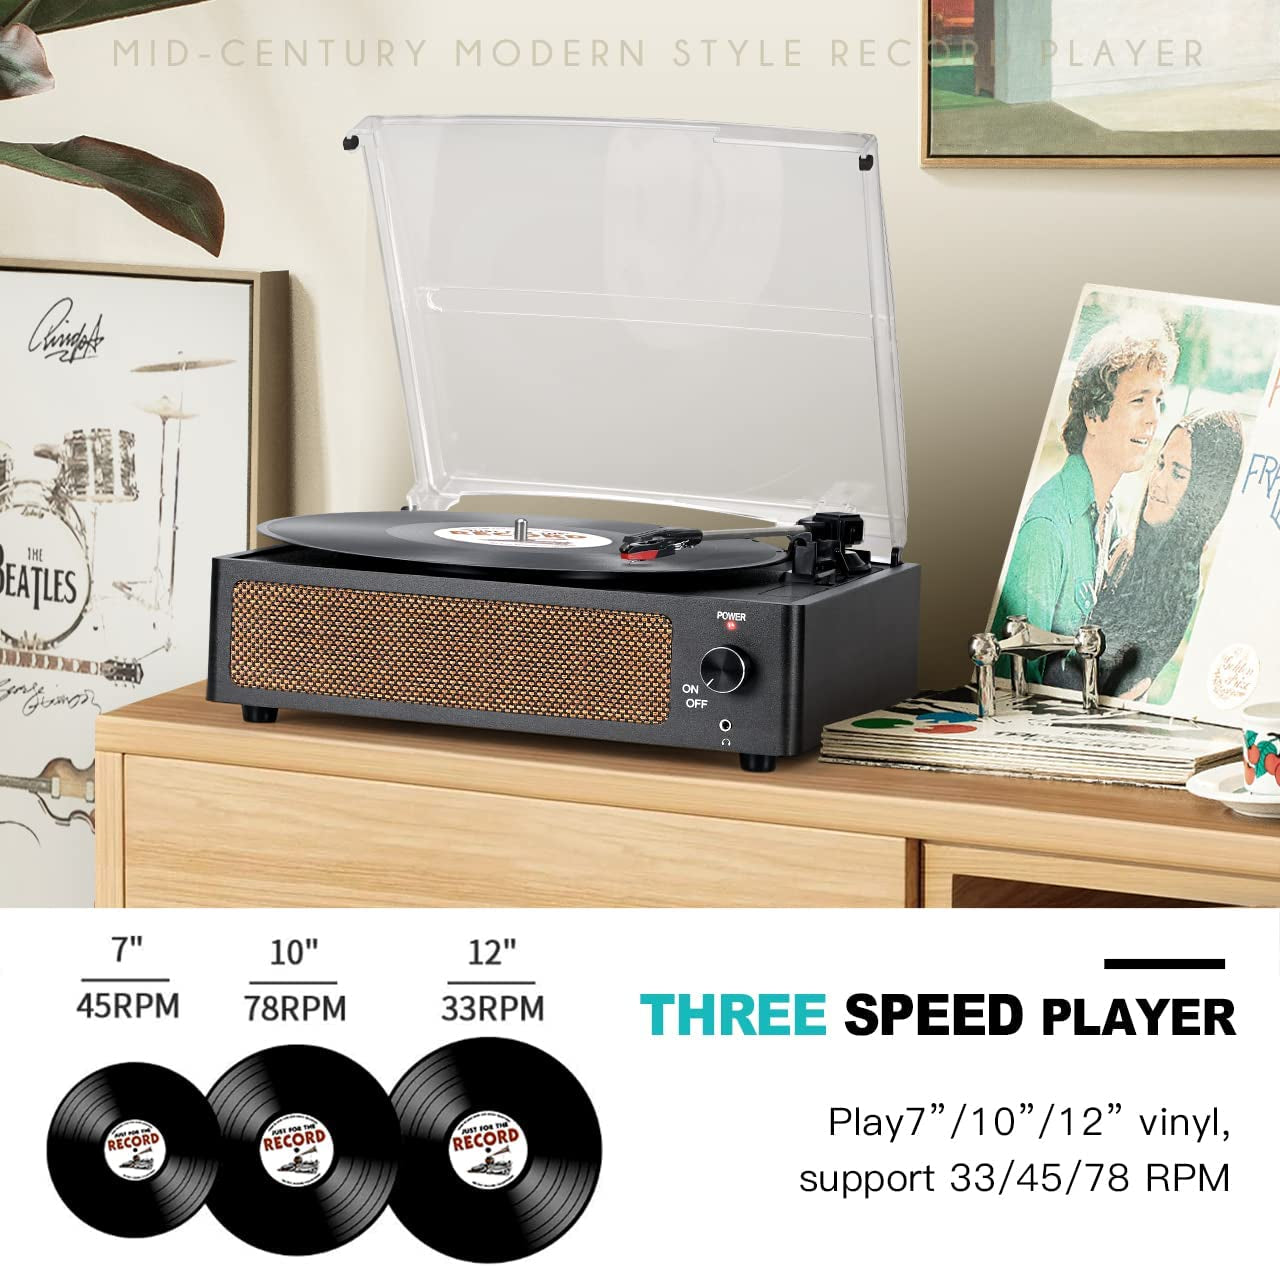 Vinyl Record Player with Speaker Vintage Turntable for Vinyl Records, Belt-Driven Turntable Support 3-Speed, Wireless Playback, Headphone, Aux-In, RCA Line LP Vinyl Players for Sound Enjoyment Black